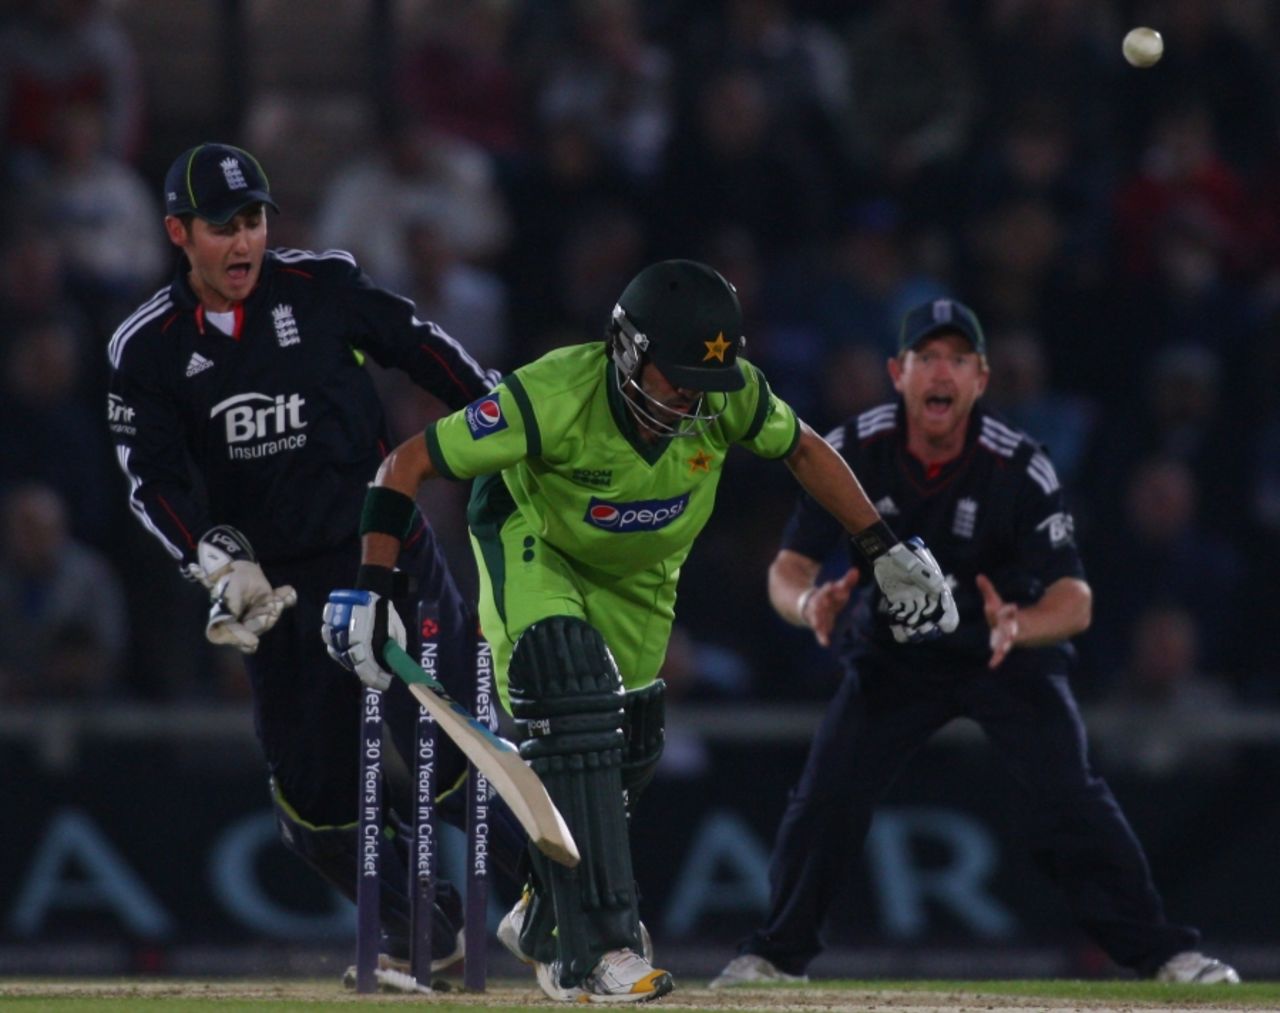 Fawad Alam was completely undone by drift and spin in Graeme Swann's first over, England v Pakistan, 5th ODI, Rose Bowl, September 22, 2010